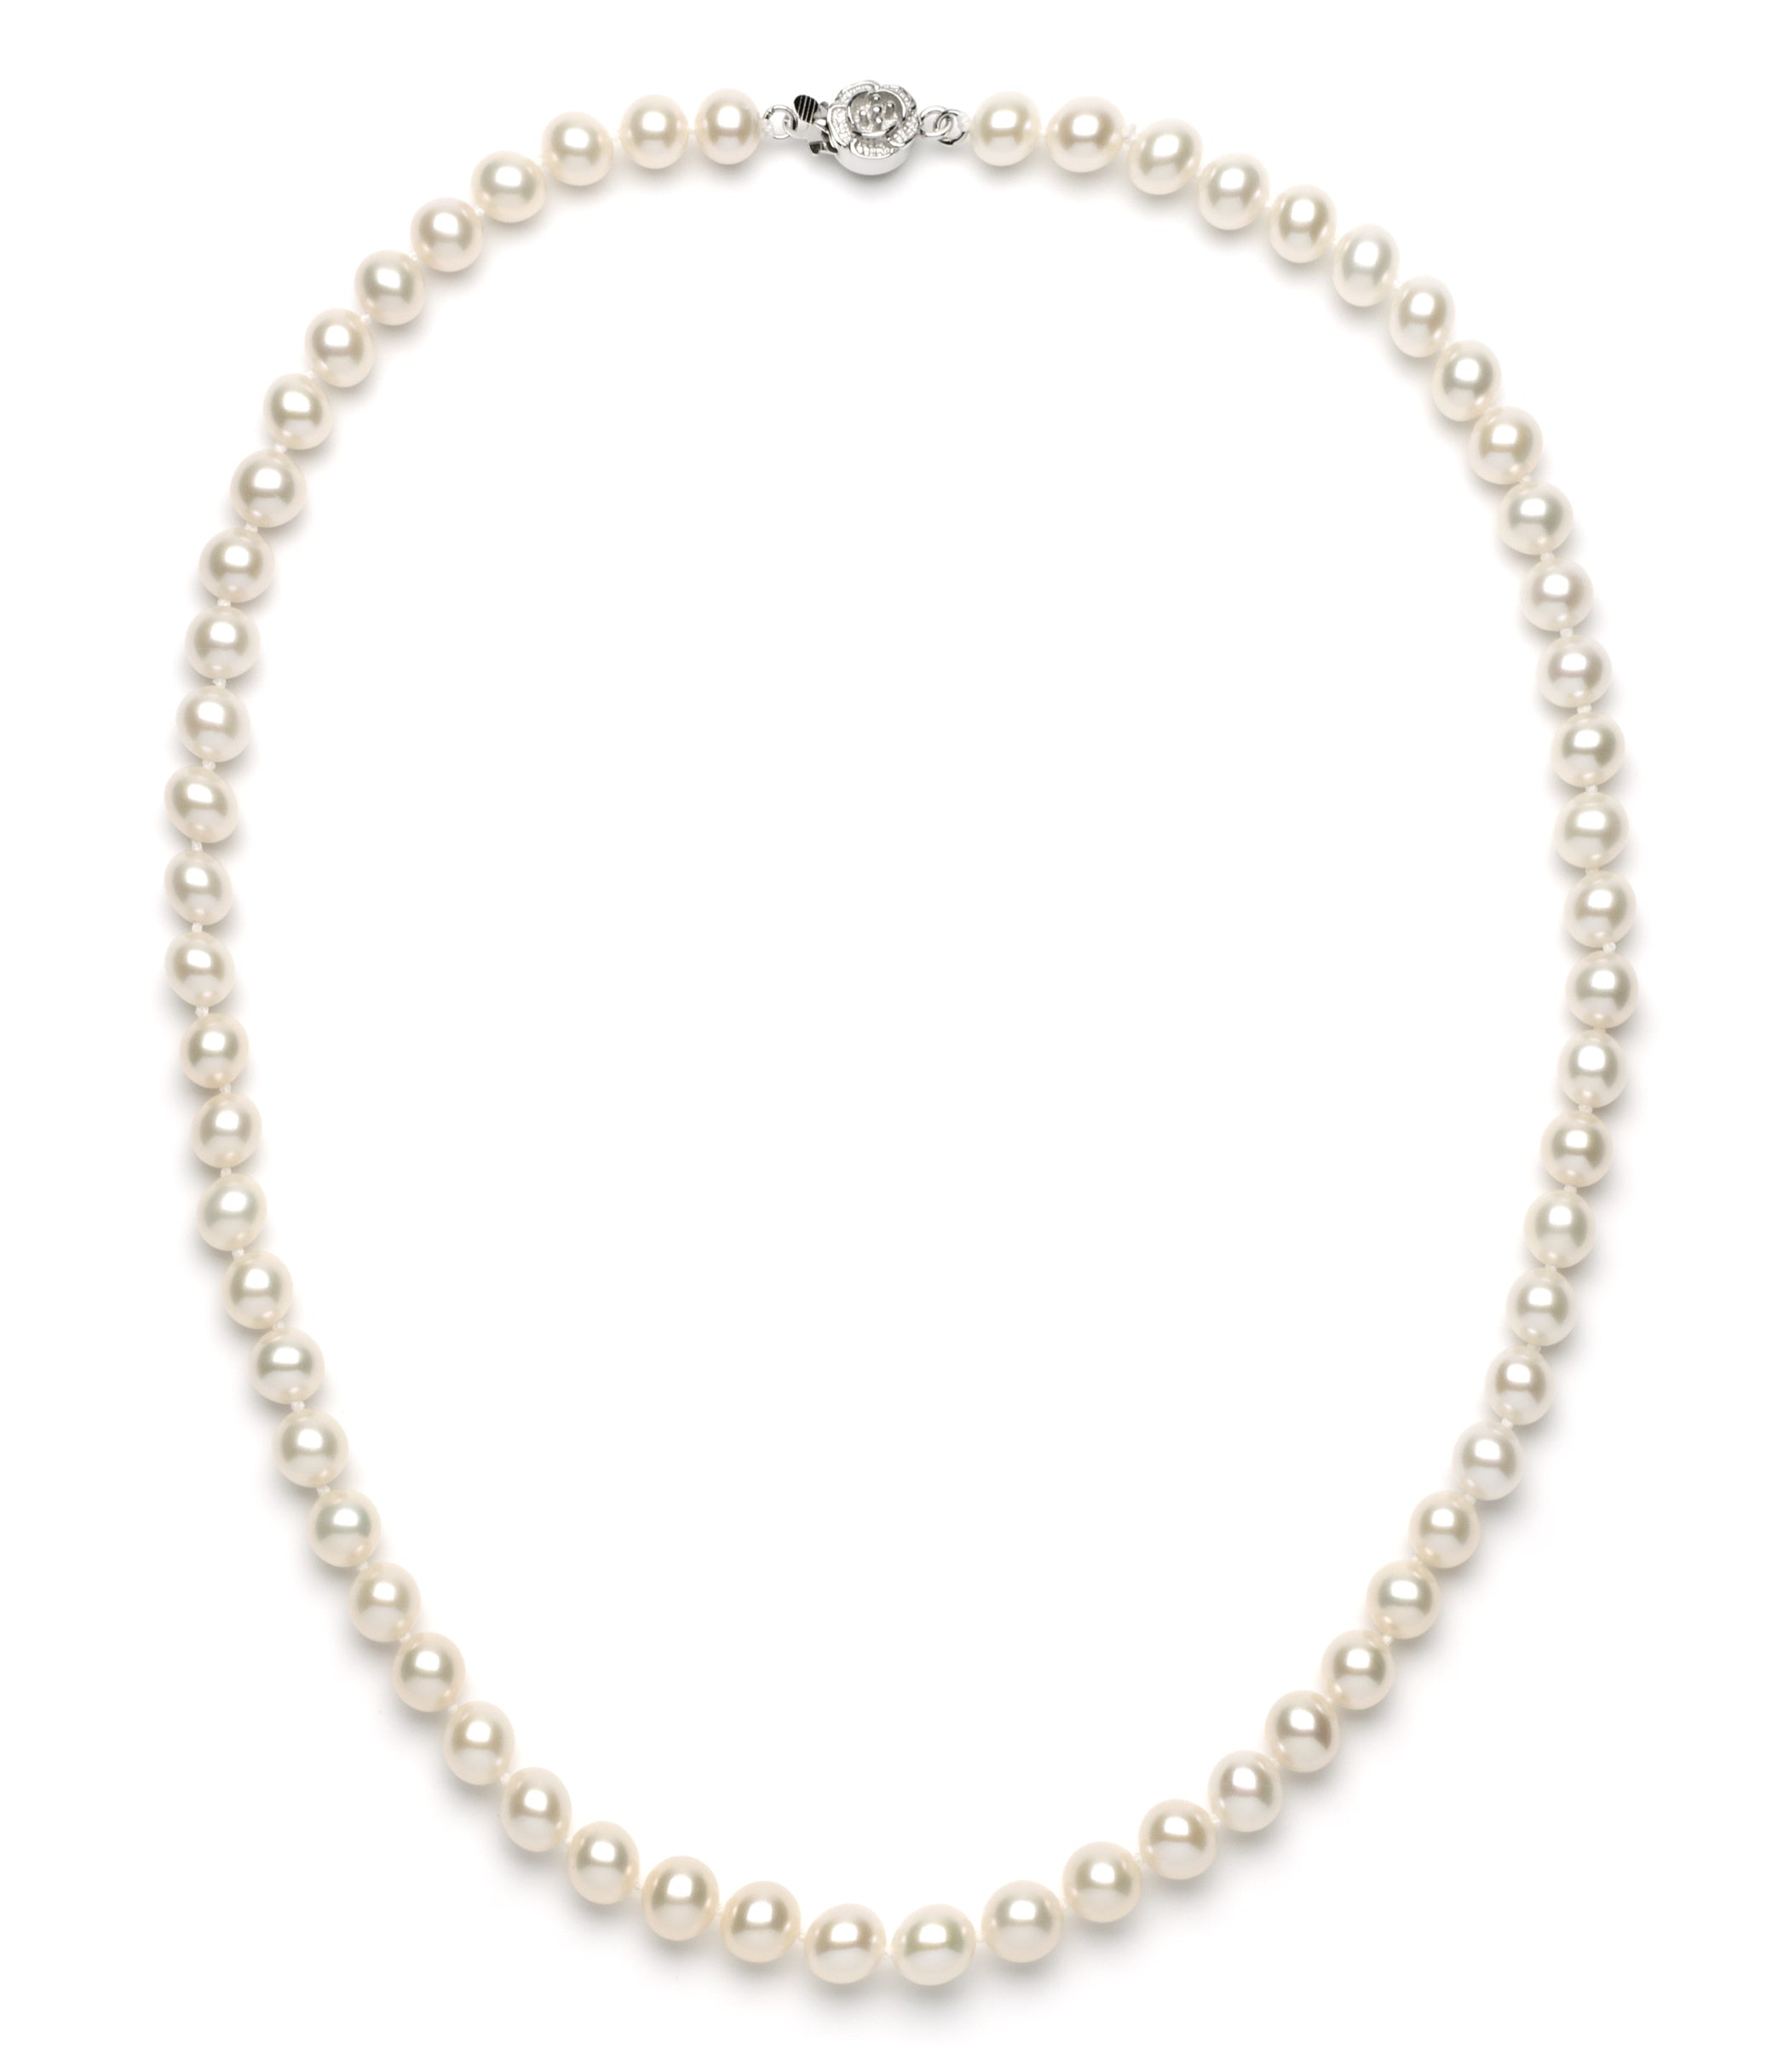 Necklace/Earrings Set 7.0-8.0 mm White Freshwater Pearls